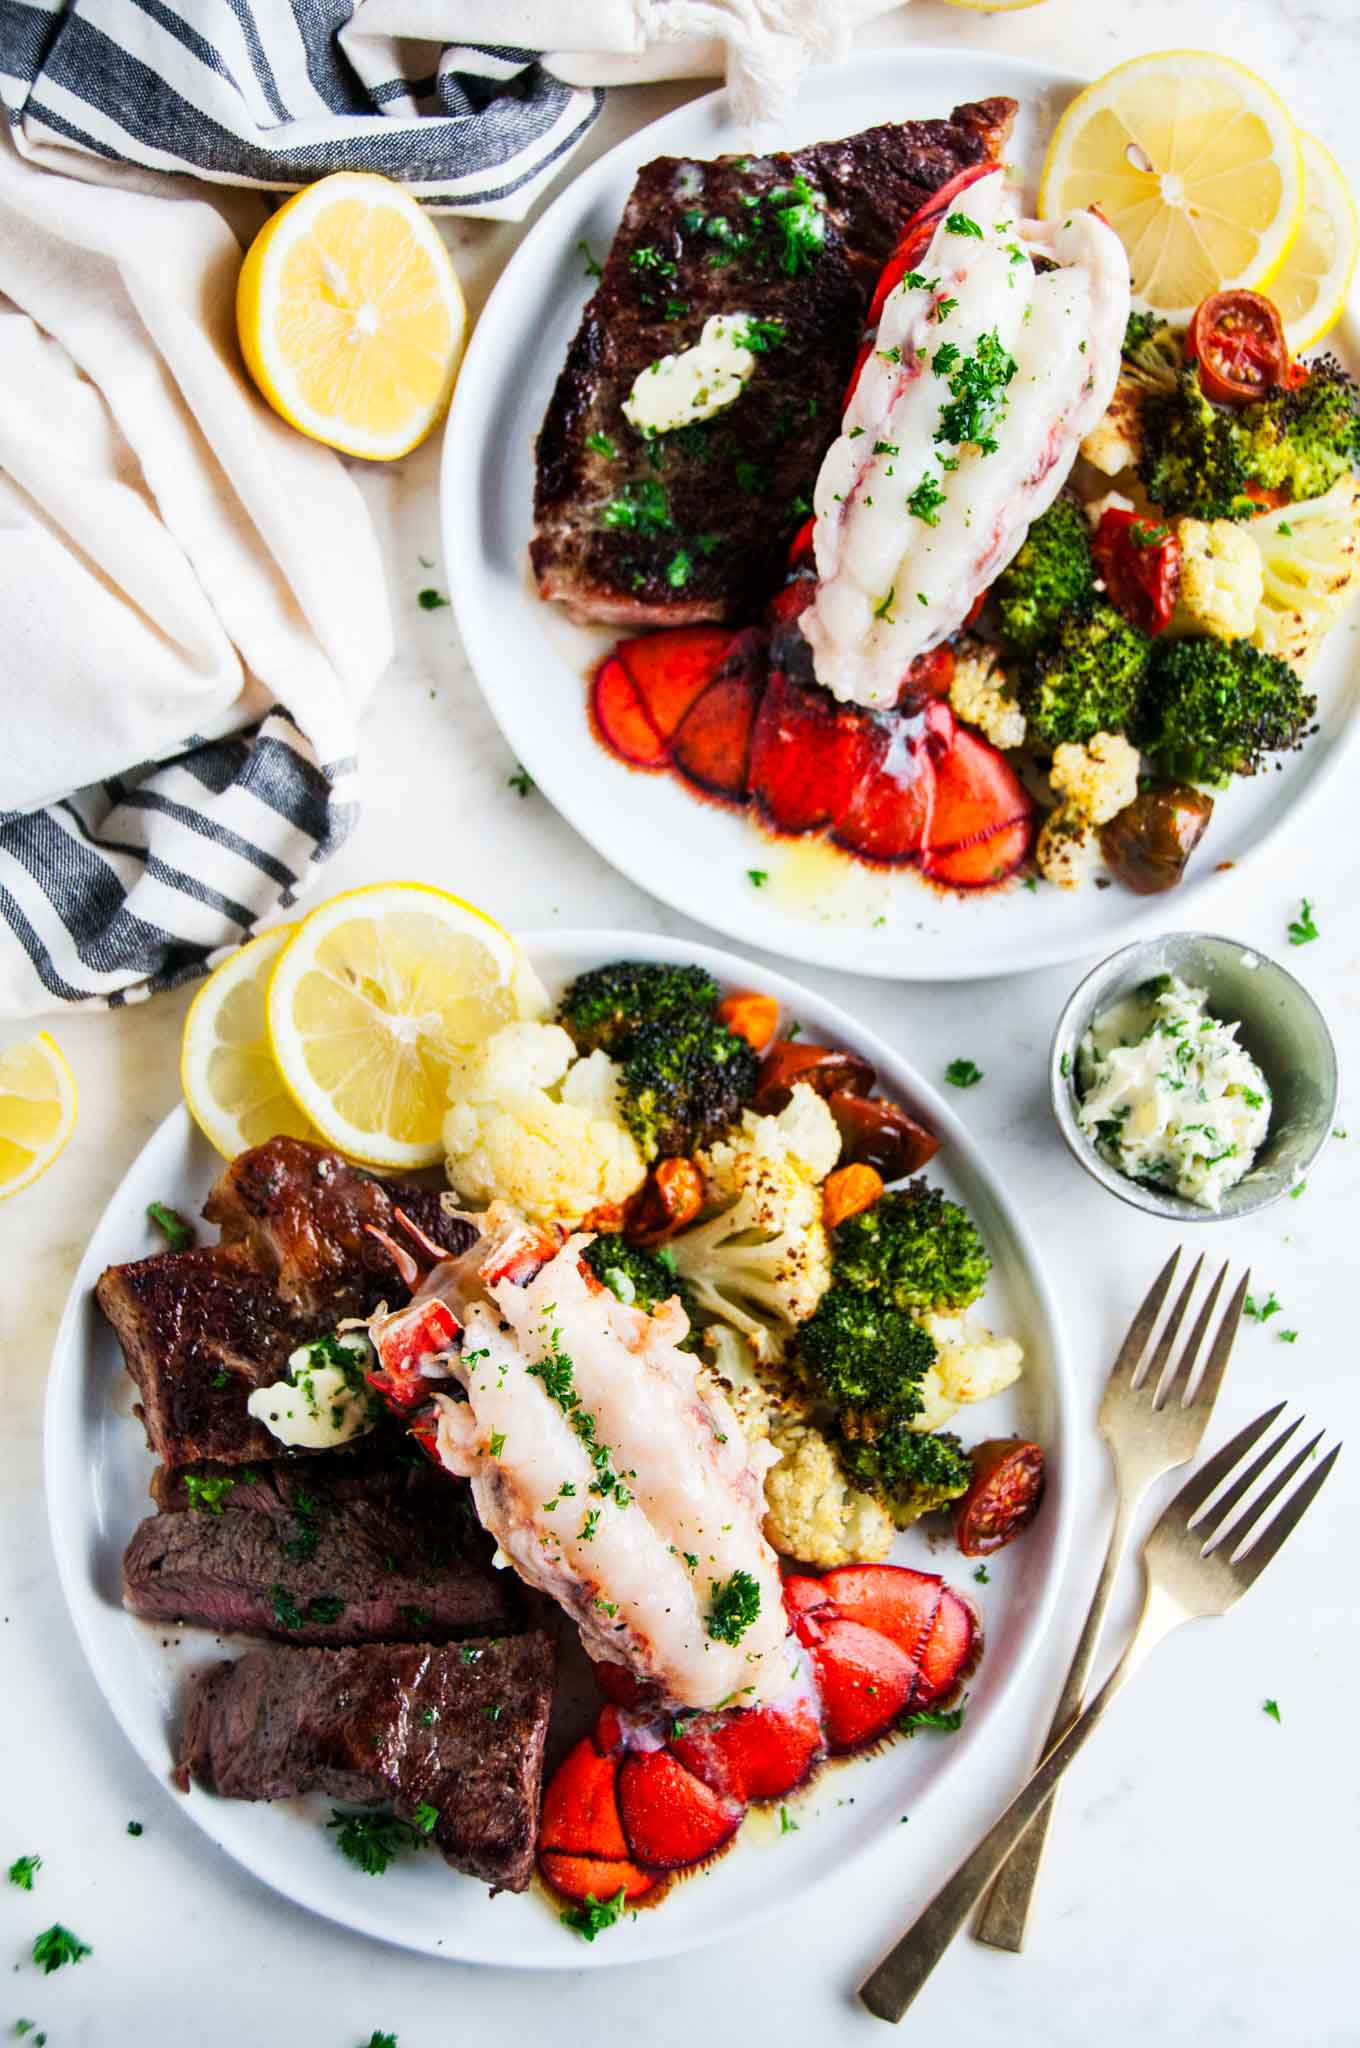 Surf and Turf Steak and Lobster Tail For Two - Aberdeen's ...